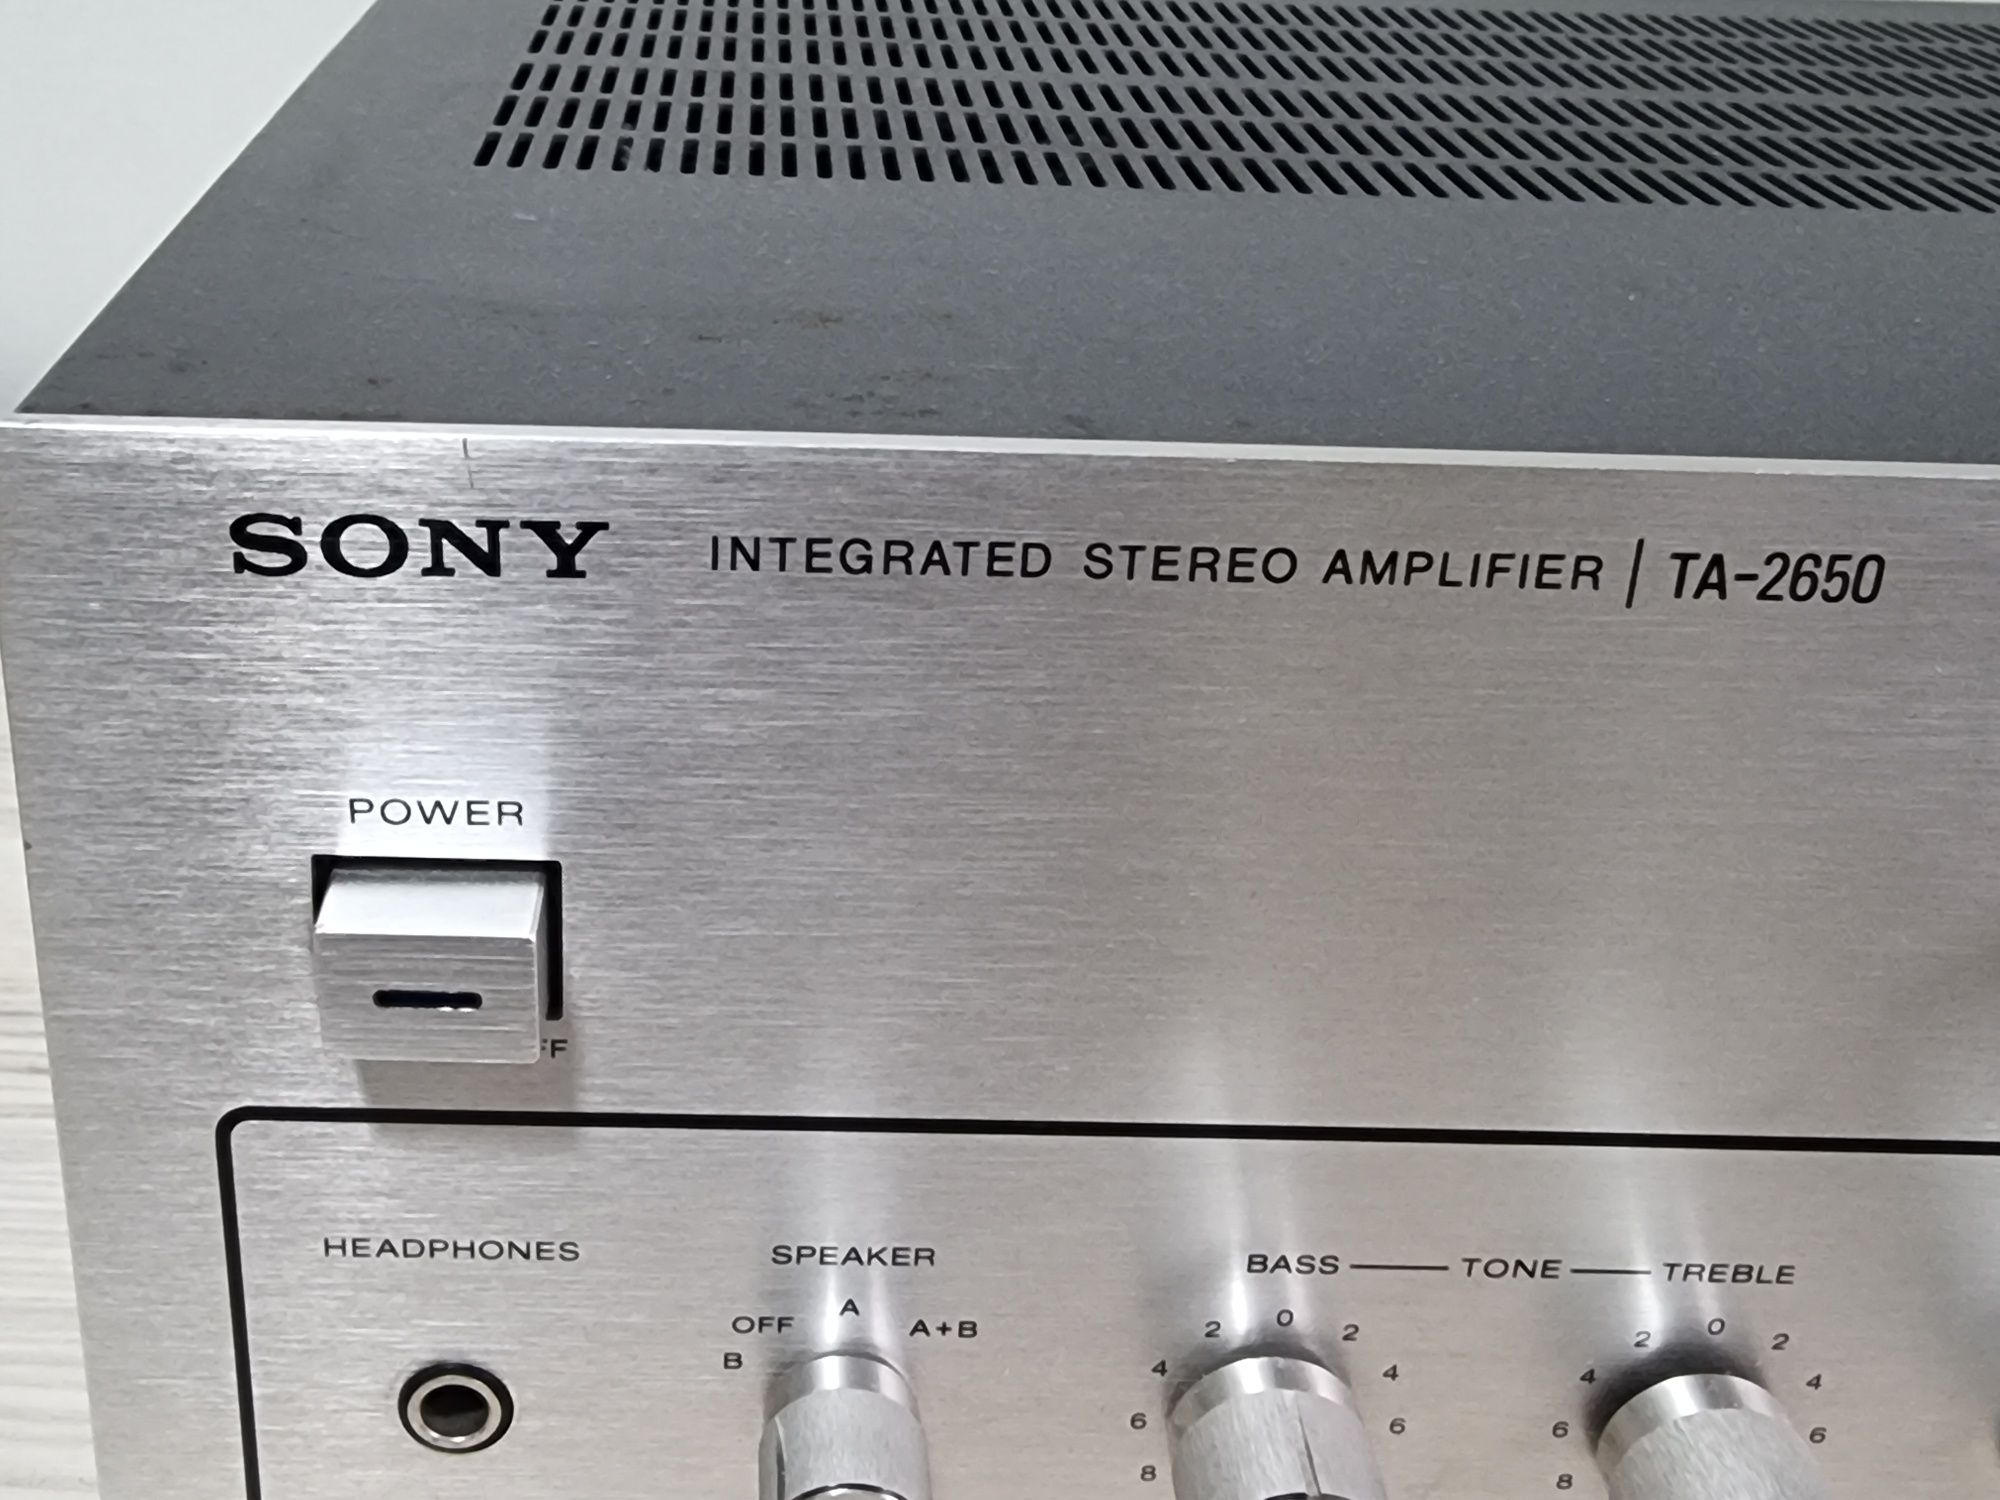 Sony TA-2650 Integrated stereo amplifier